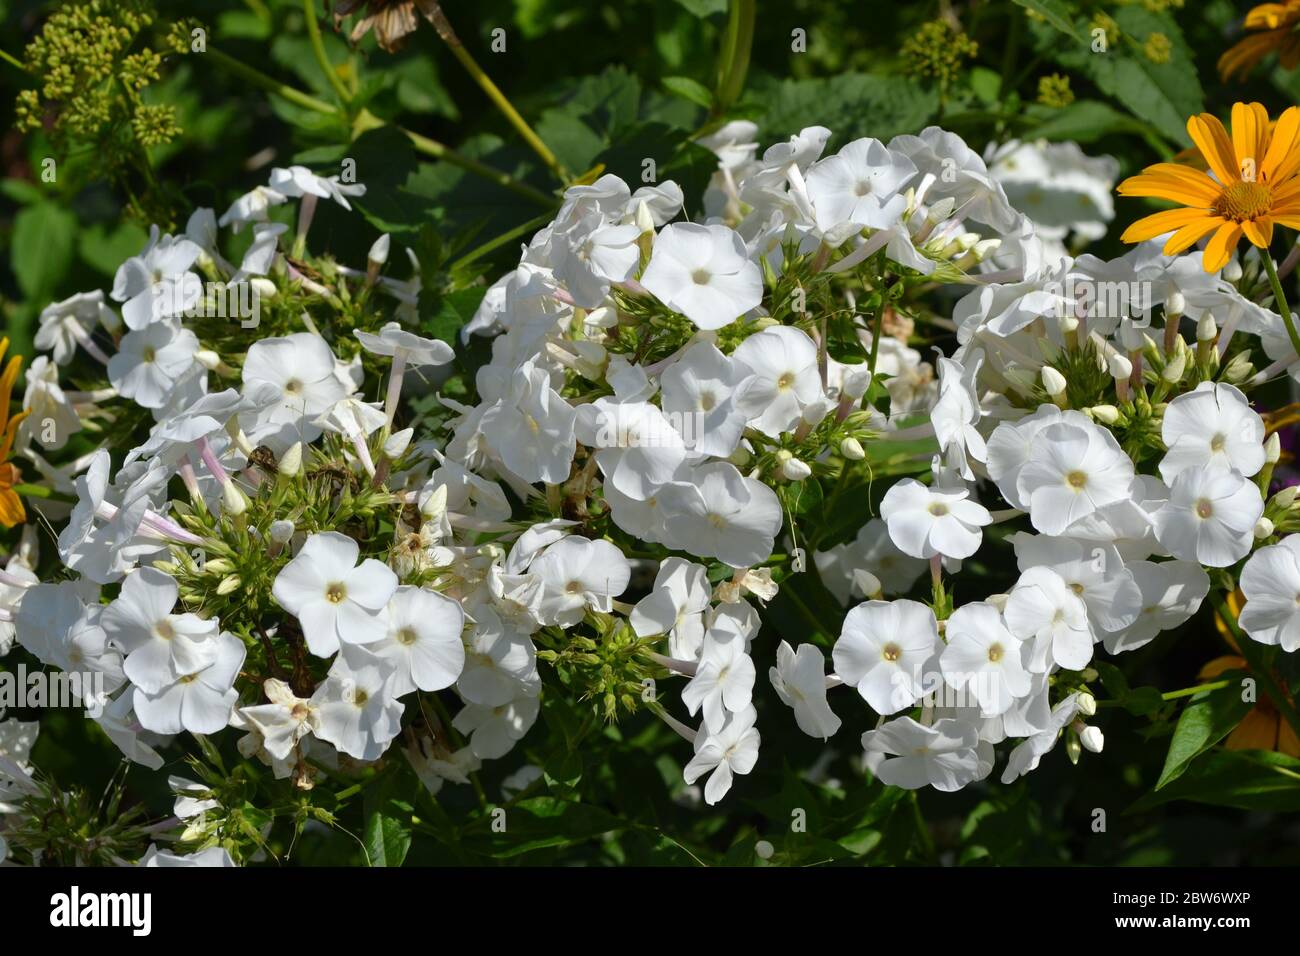 Gardening. Home garden. Beautiful inflorescences. Phlox flower. Perennial herbaceous plant. High branches. White flowers Stock Photo